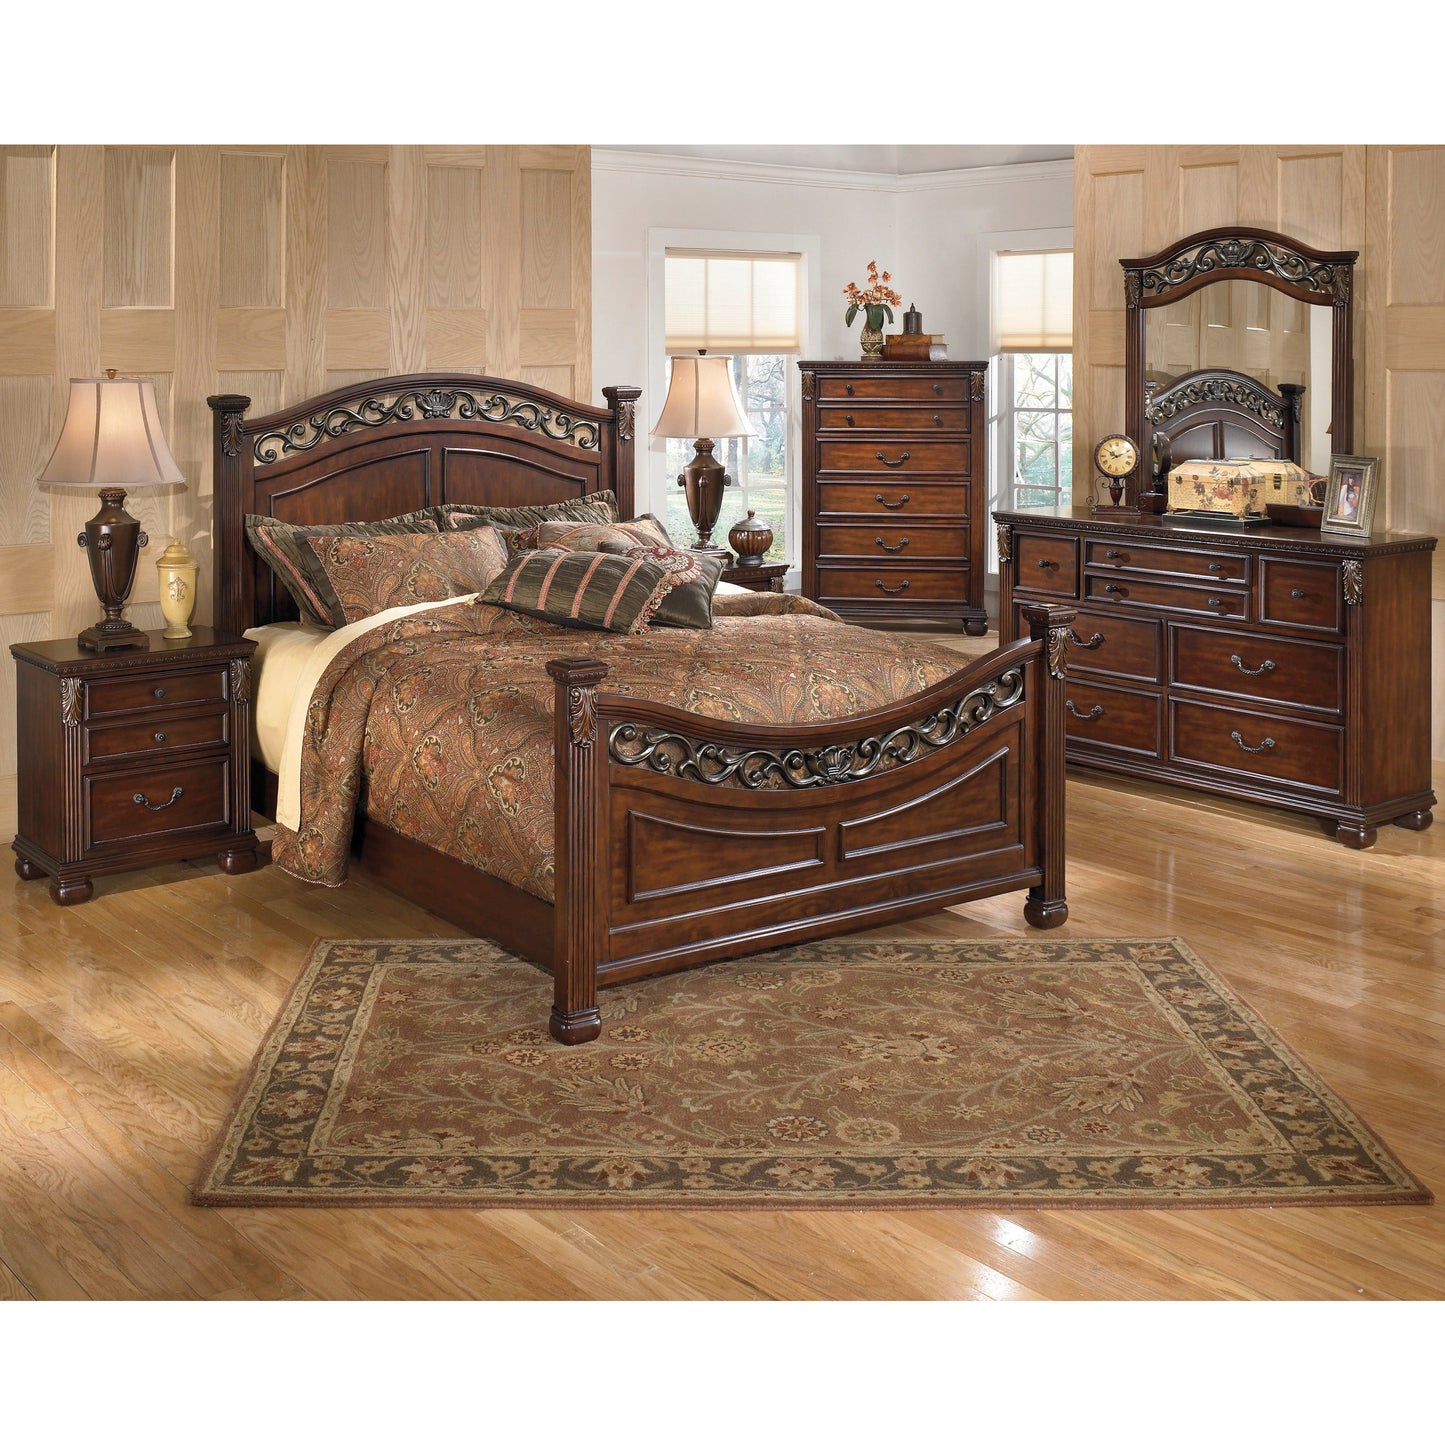 LEAHLYN PANEL BED - WARM BROWN